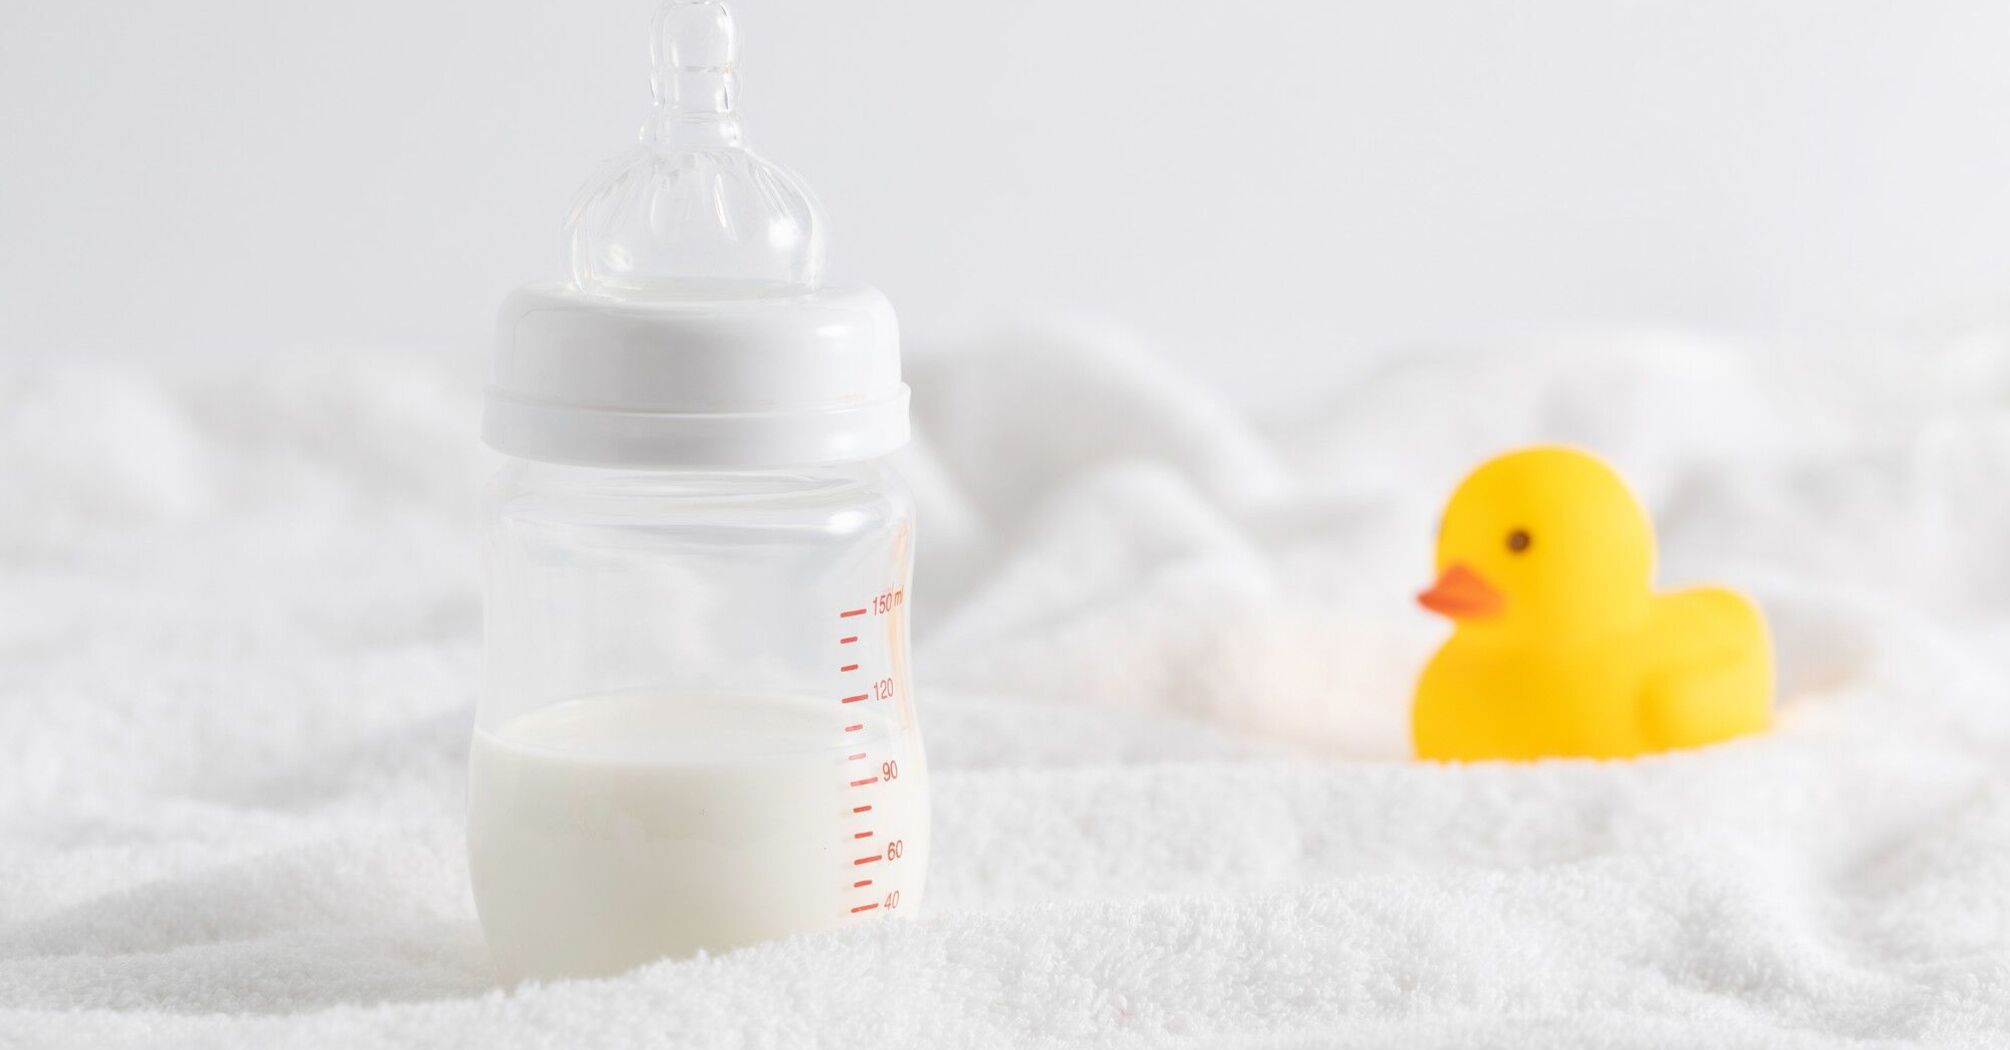 Ryanair, easyJet, TUI and Jet2 airlines to update rules for liquid transportation, including baby milk